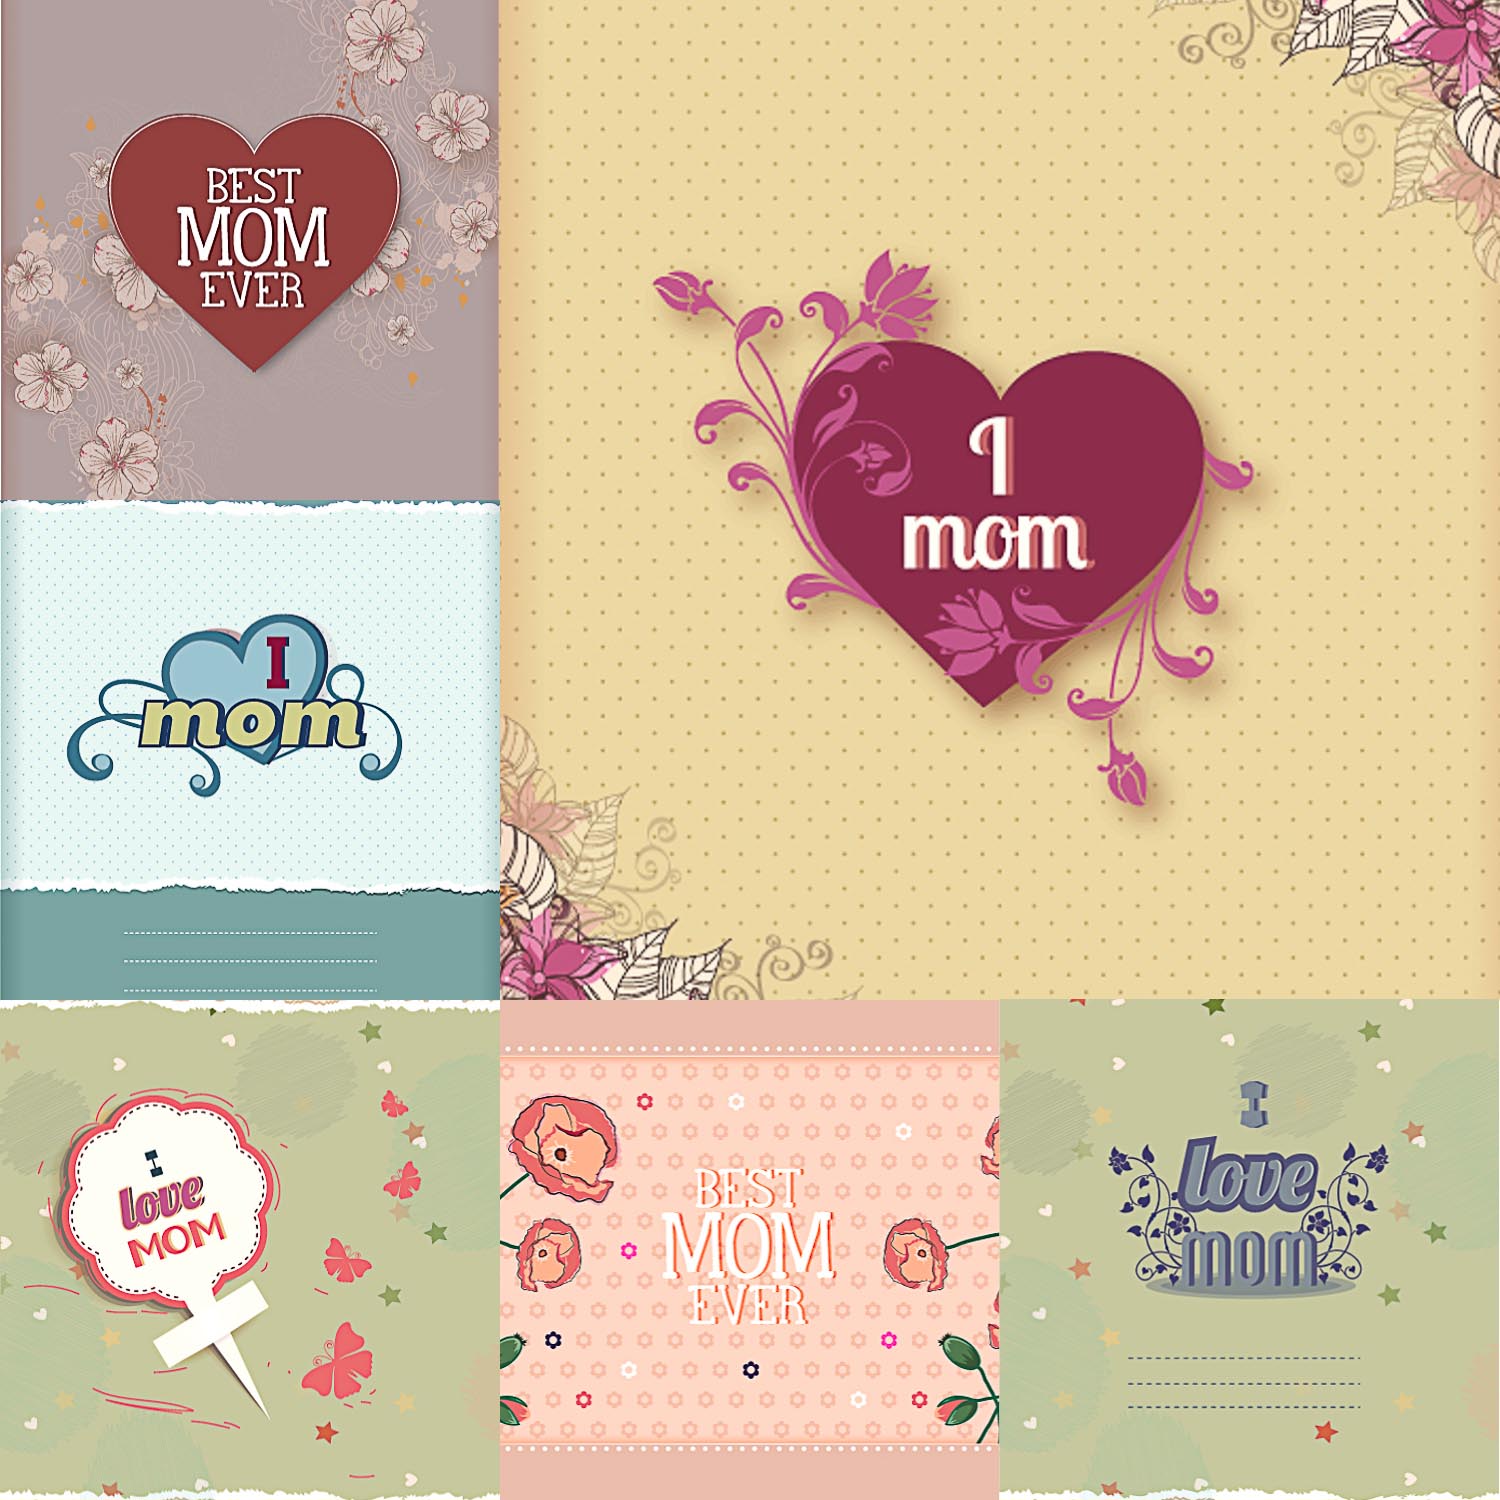 Mothers Day lovely card vector